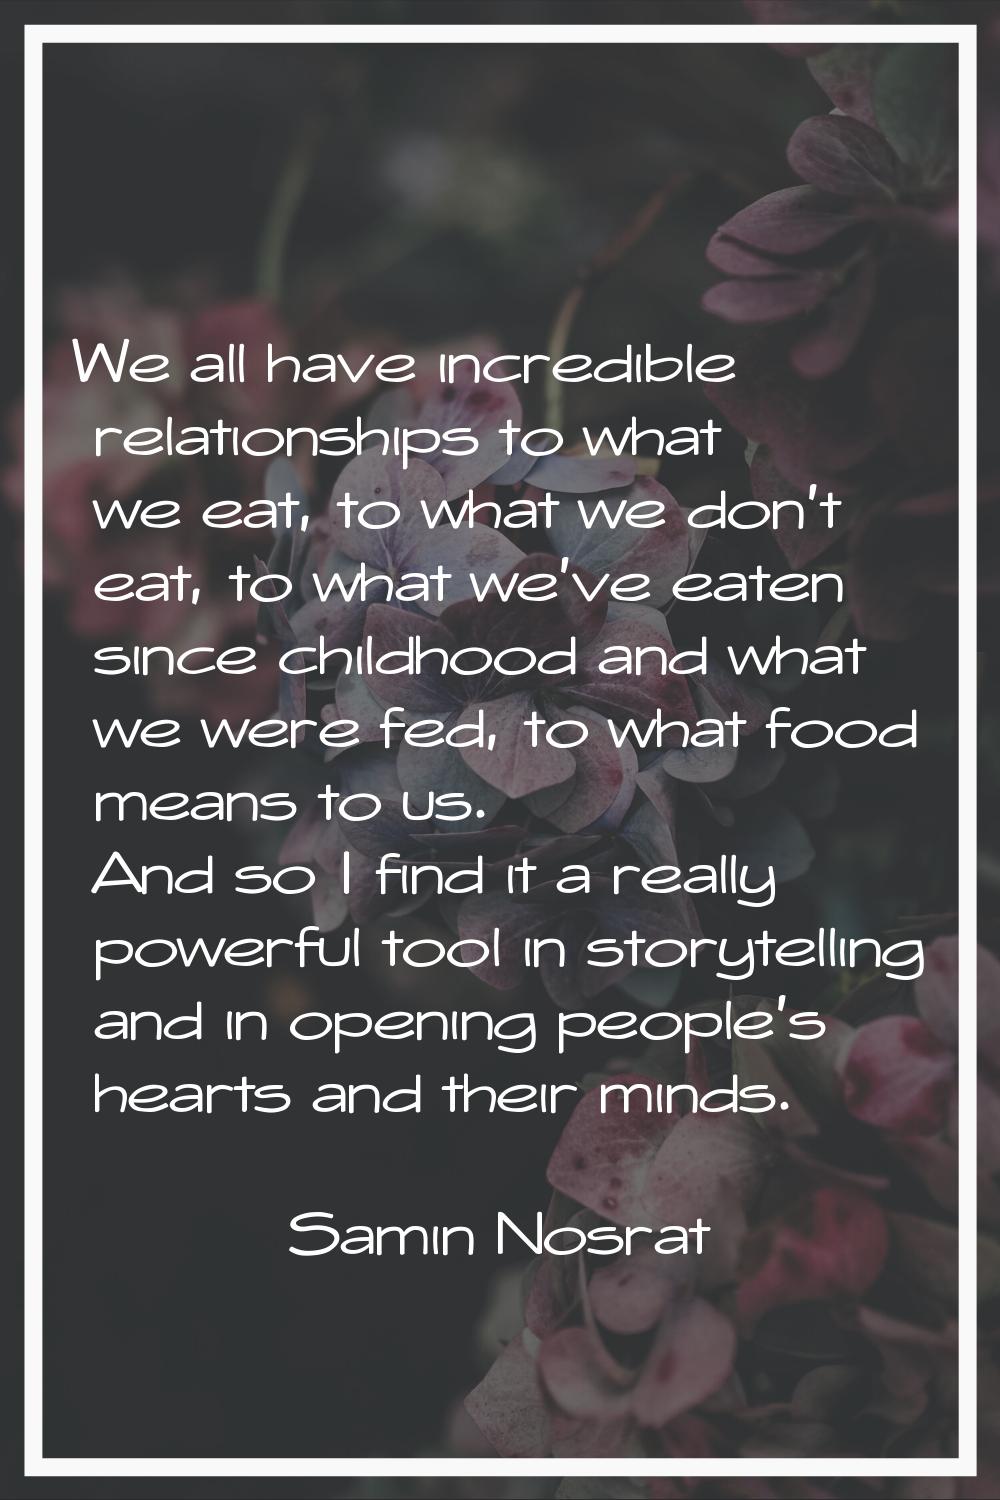 We all have incredible relationships to what we eat, to what we don't eat, to what we've eaten sinc